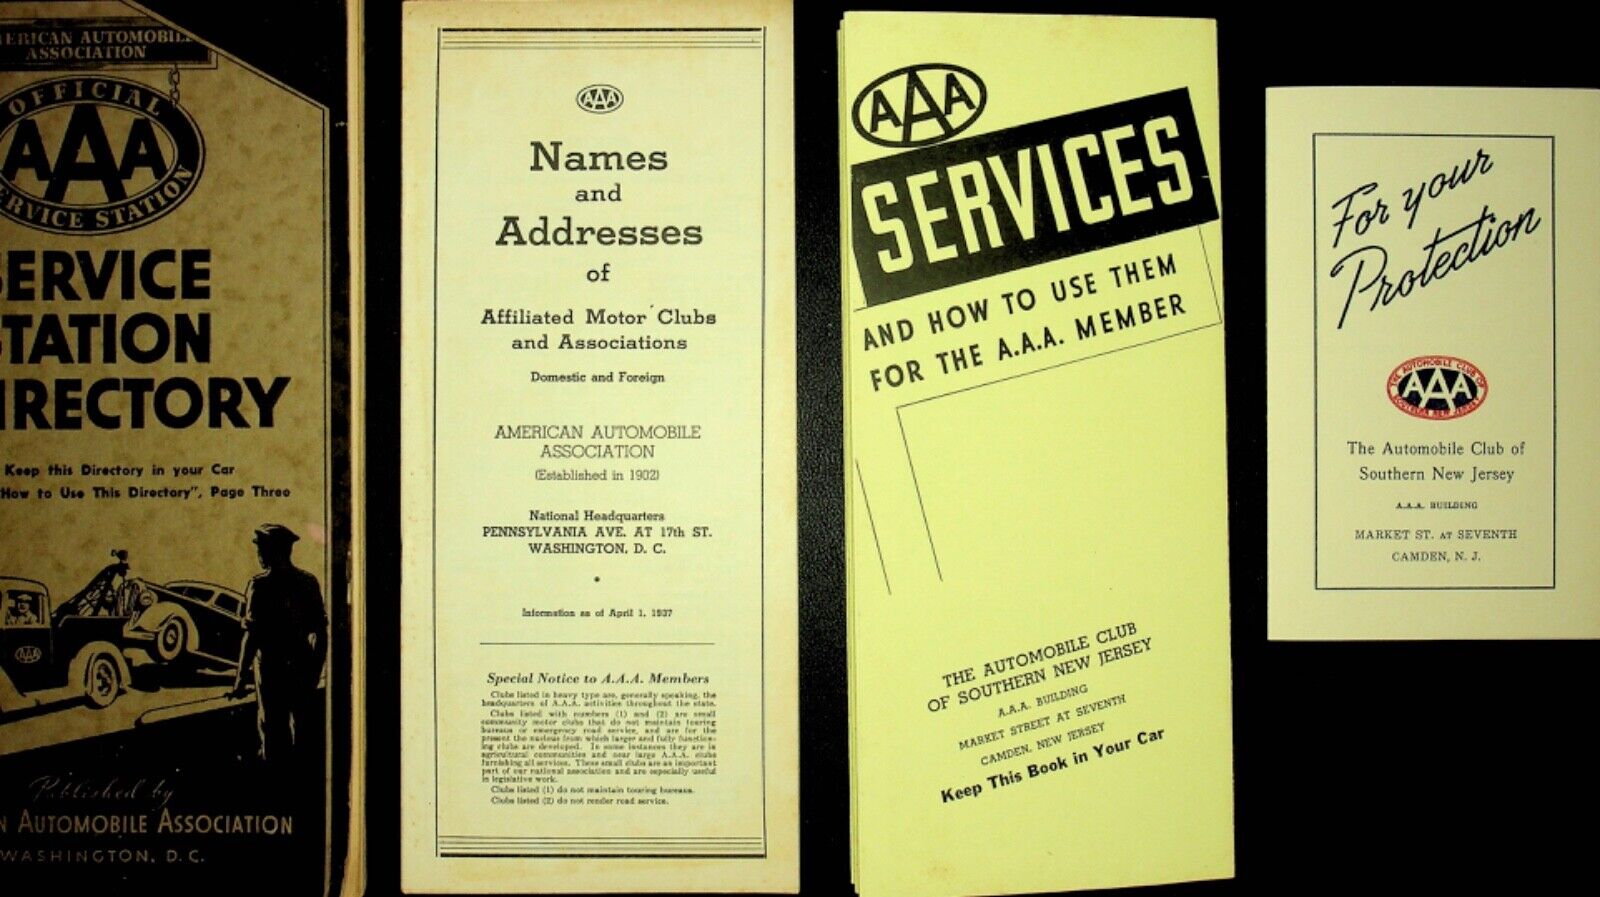 1937  AAA SERVICE STATION DIRECTORY WITH AAA CLUB OF SOUTHERN N.J. EXTRAS -E15-J